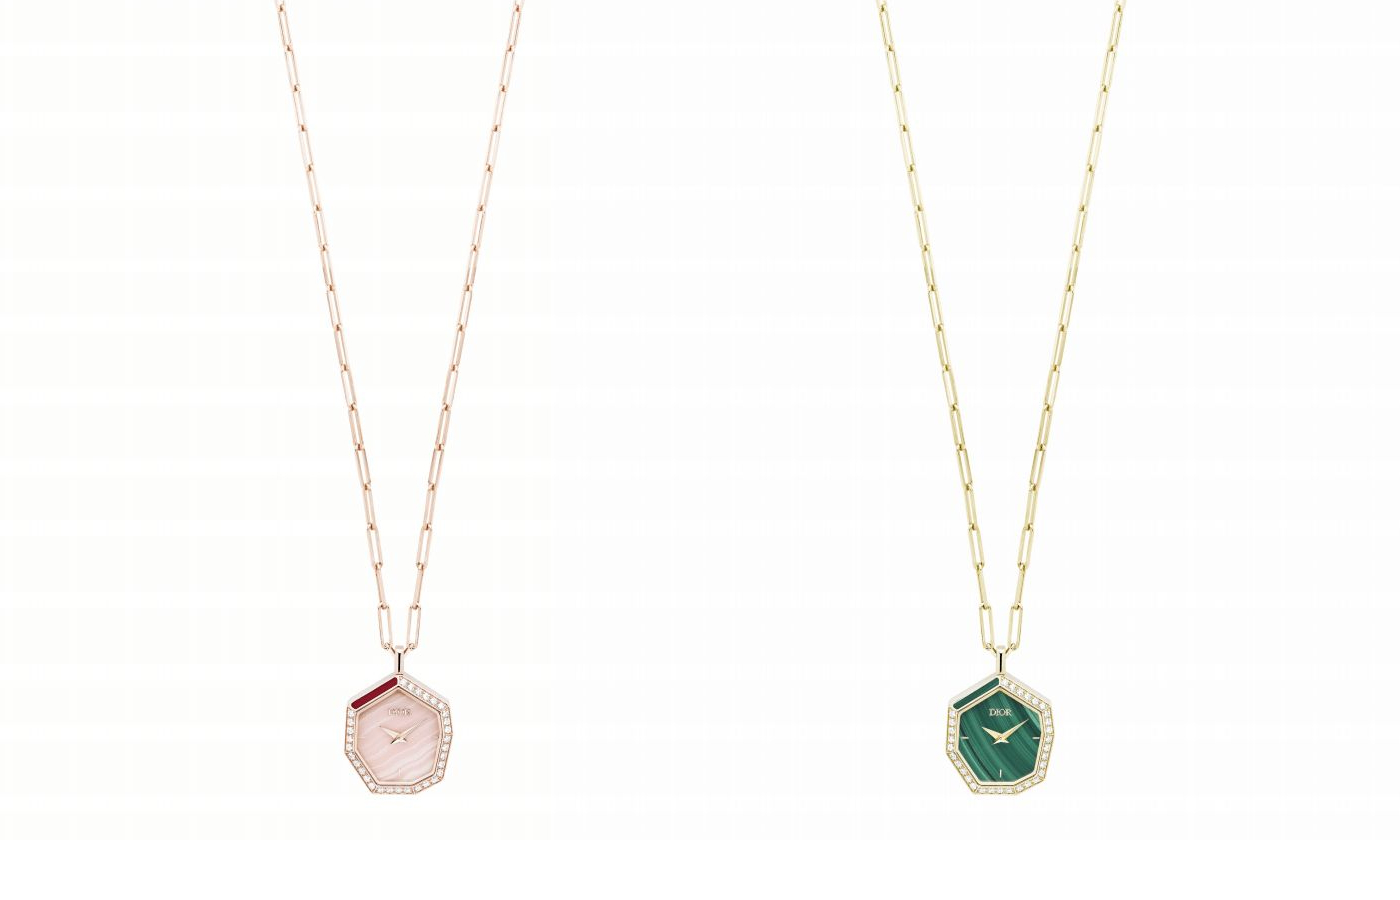 Dior Joaillerie Gem Dior Medallion necklaces in gold, pink gold, aragonite, carnelian, malachite and diamond